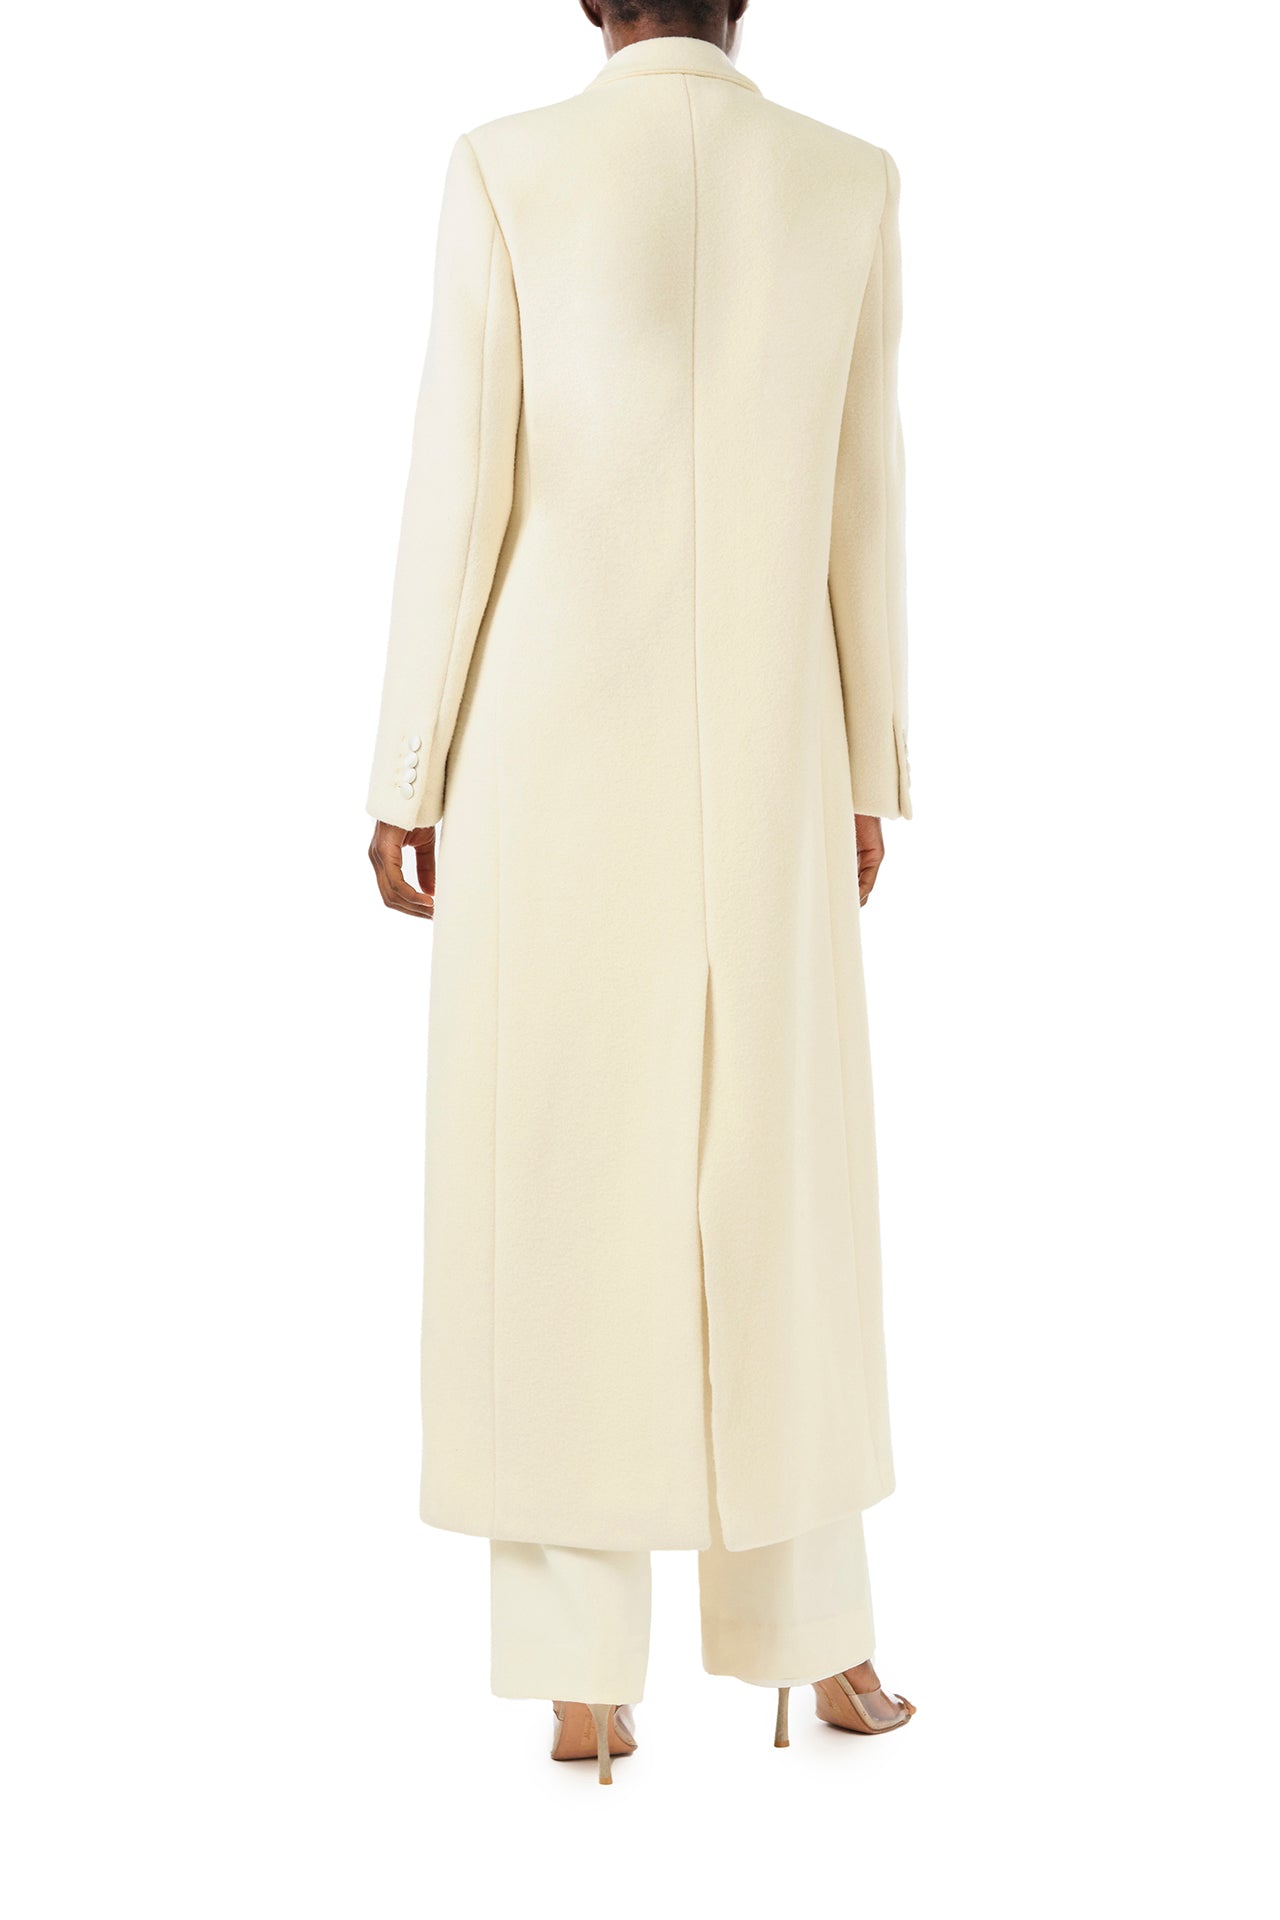 Monique Lhuillier Fall 2024 long sleeve coat in creme colored wool and single closure button - back.